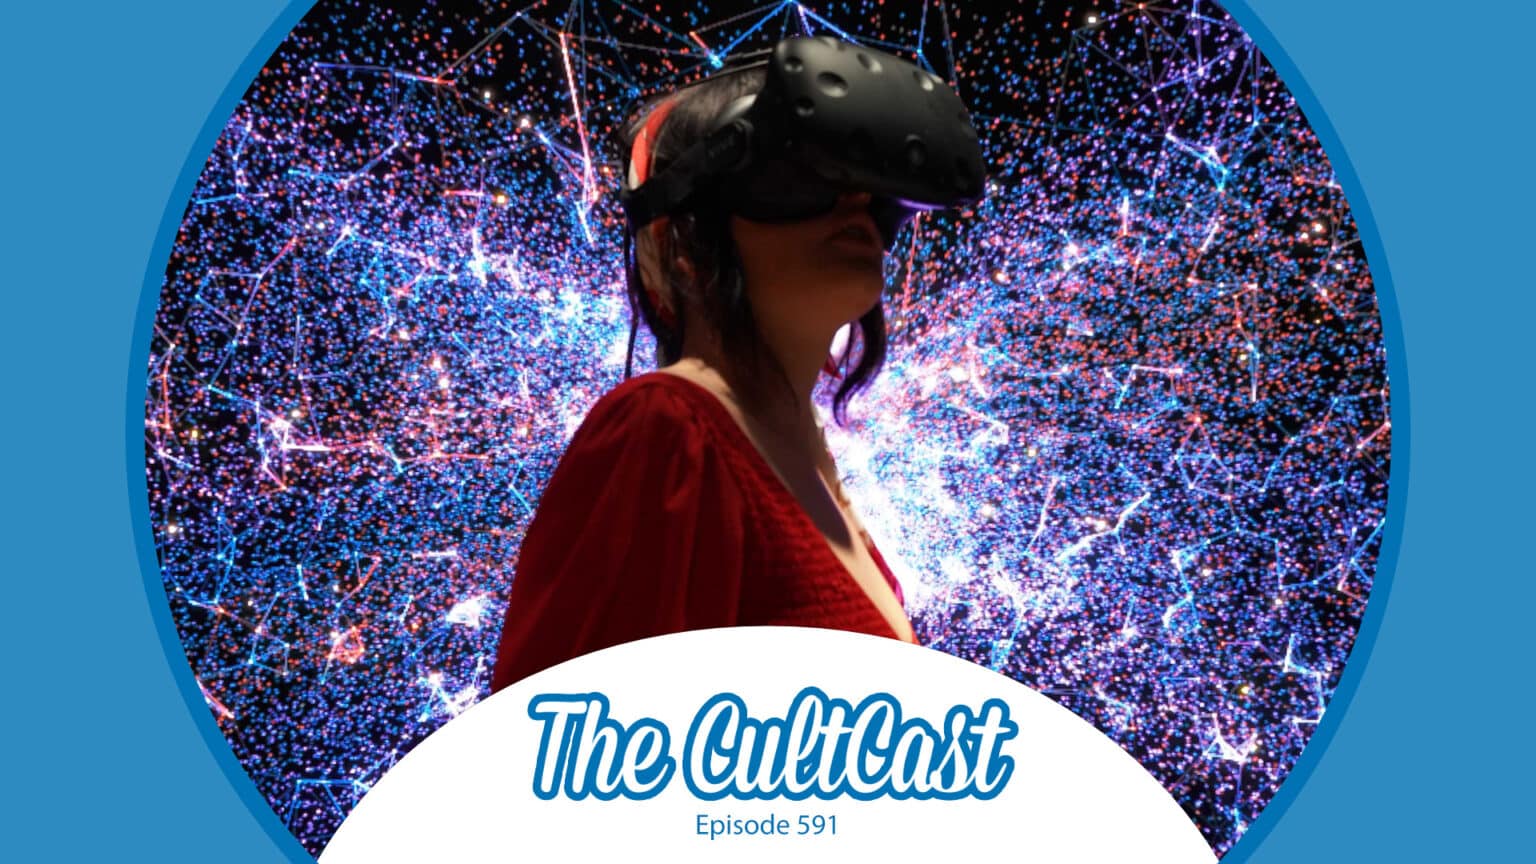 A woman wearing a VR headset, with The CultCast logo and Episode 591.